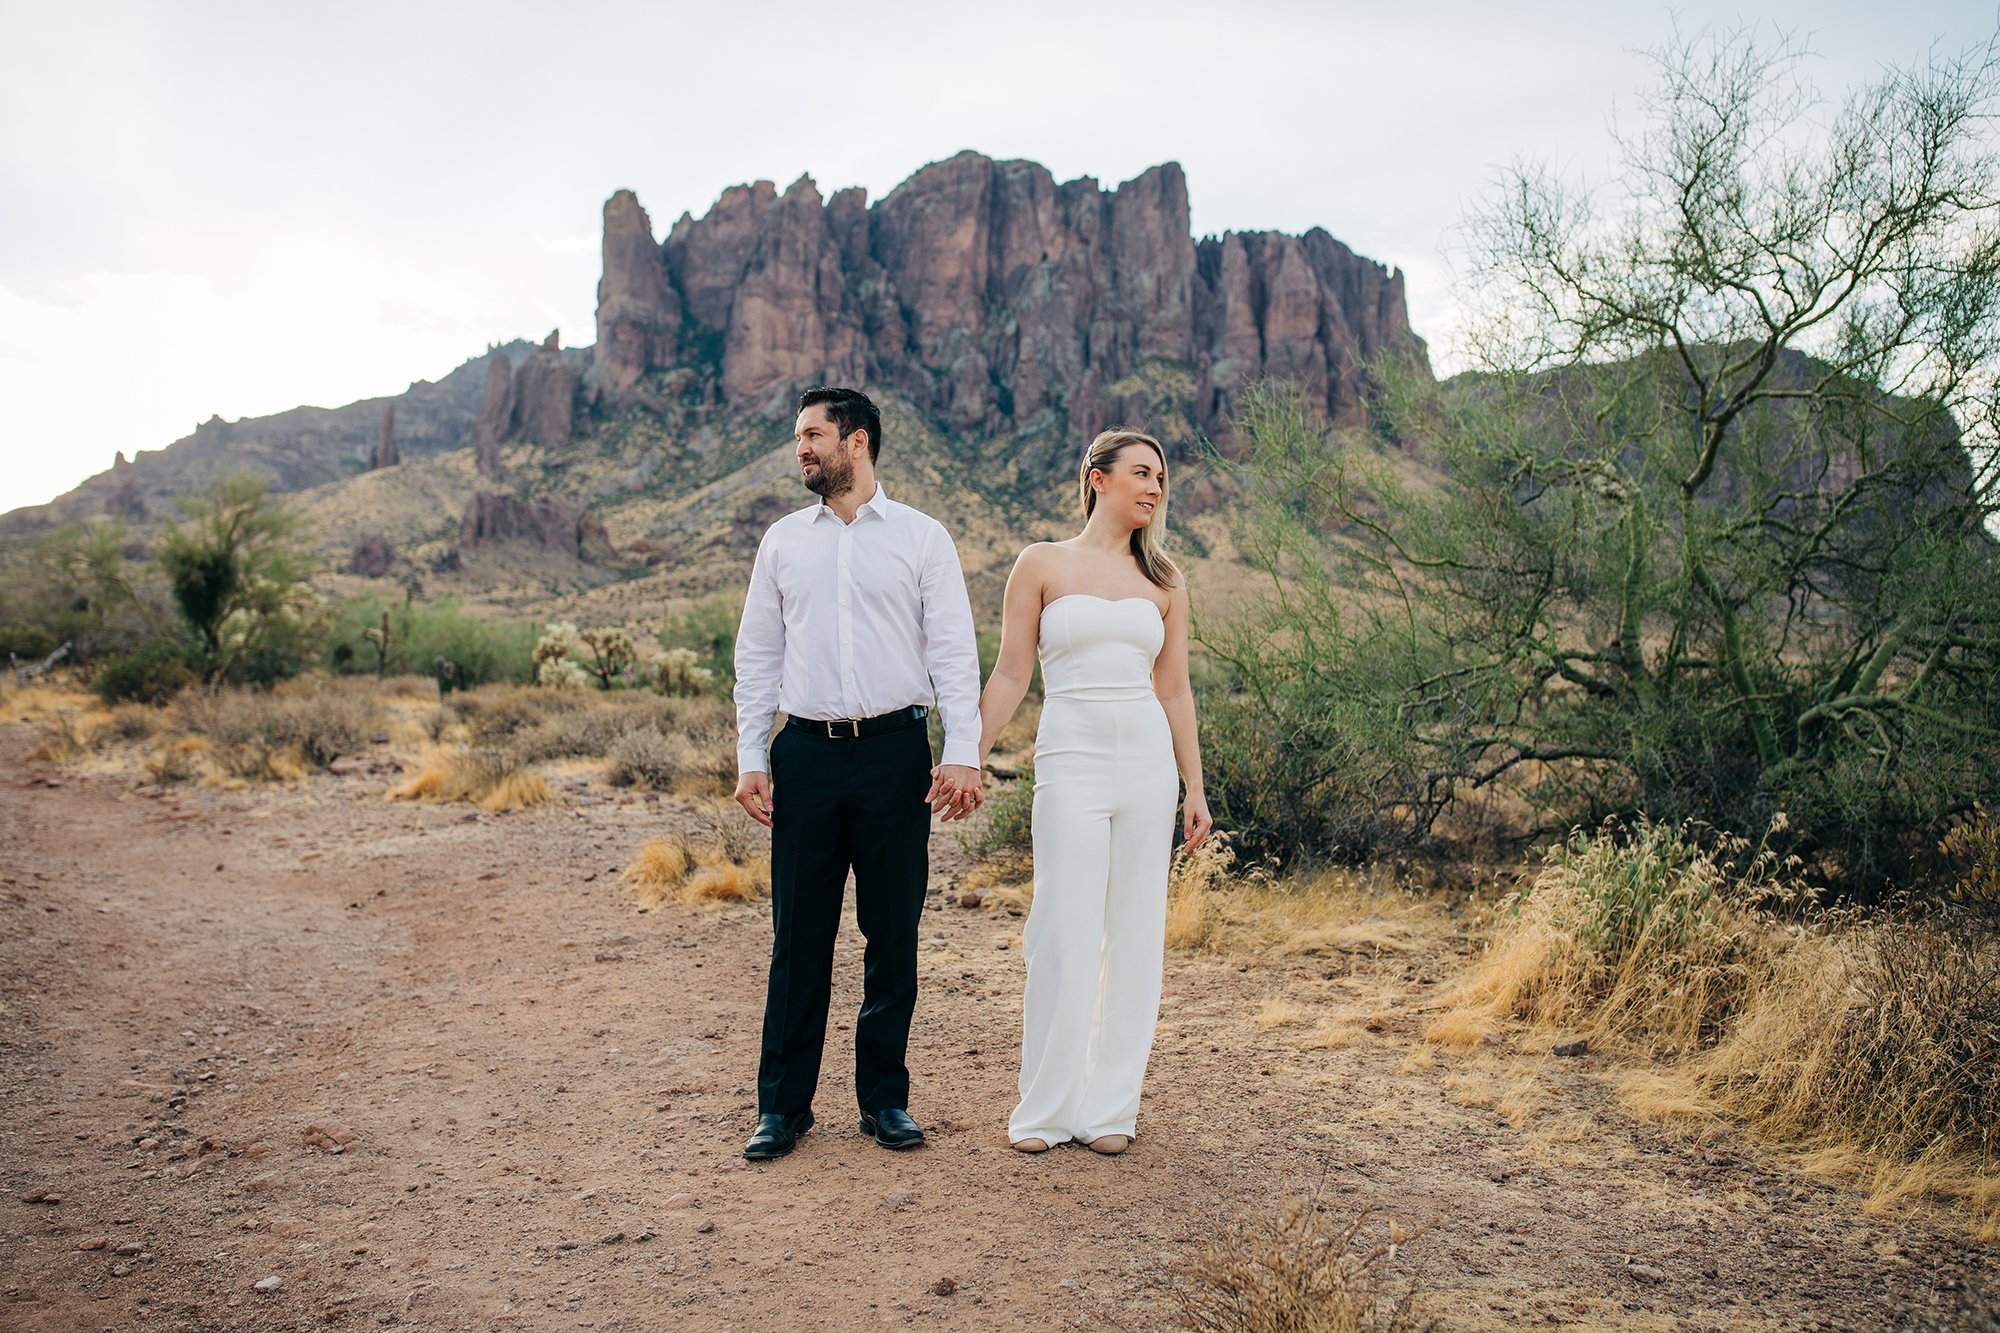 the-joys-of-a-morning-elopement-an-intimate-wedding-in-the-arizona-desert-8.jpg